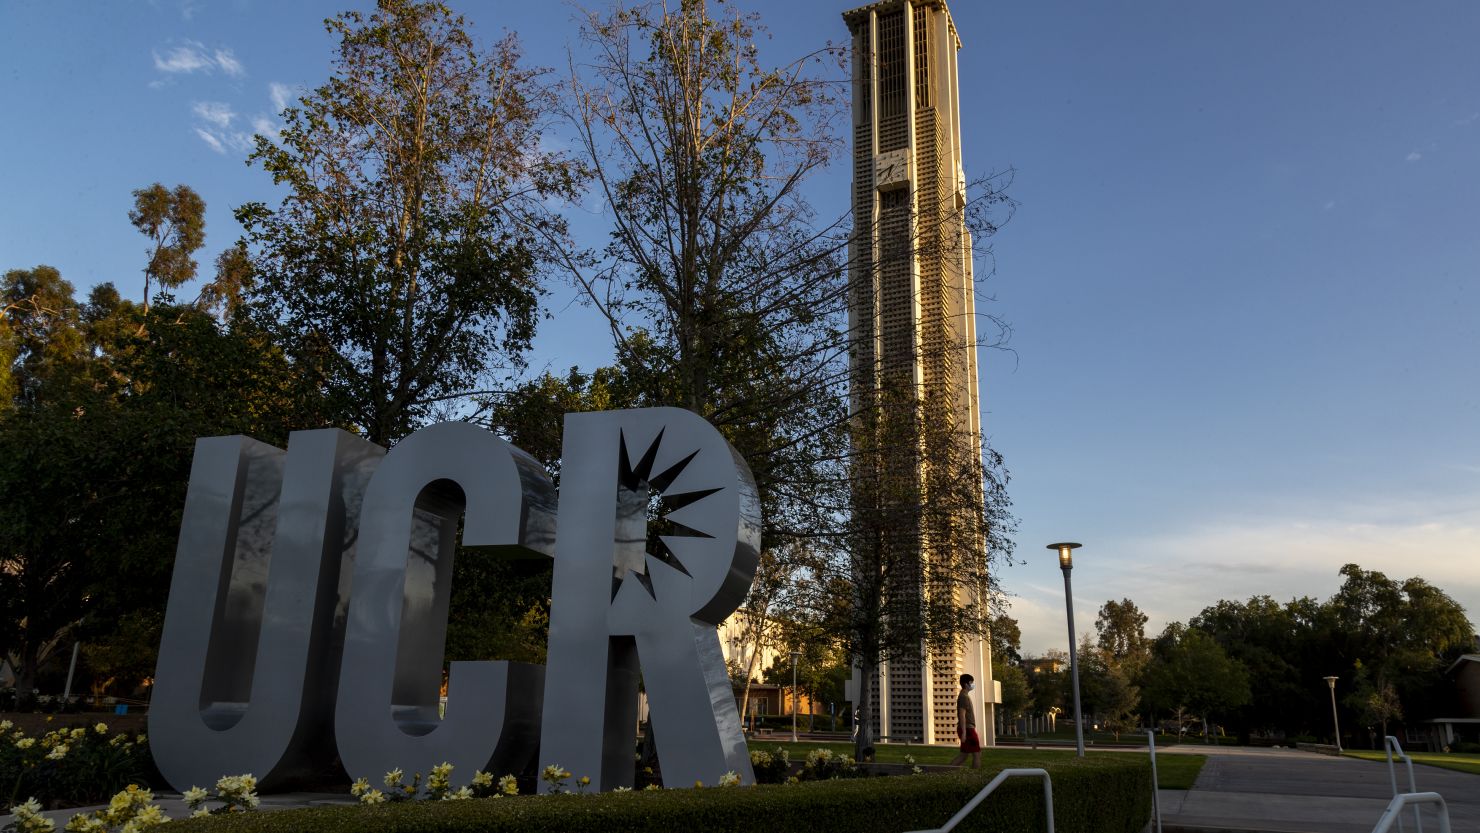 The University of California Riverside has reached an agreement to part ways with a professor accused of faking Native American ancestry. 